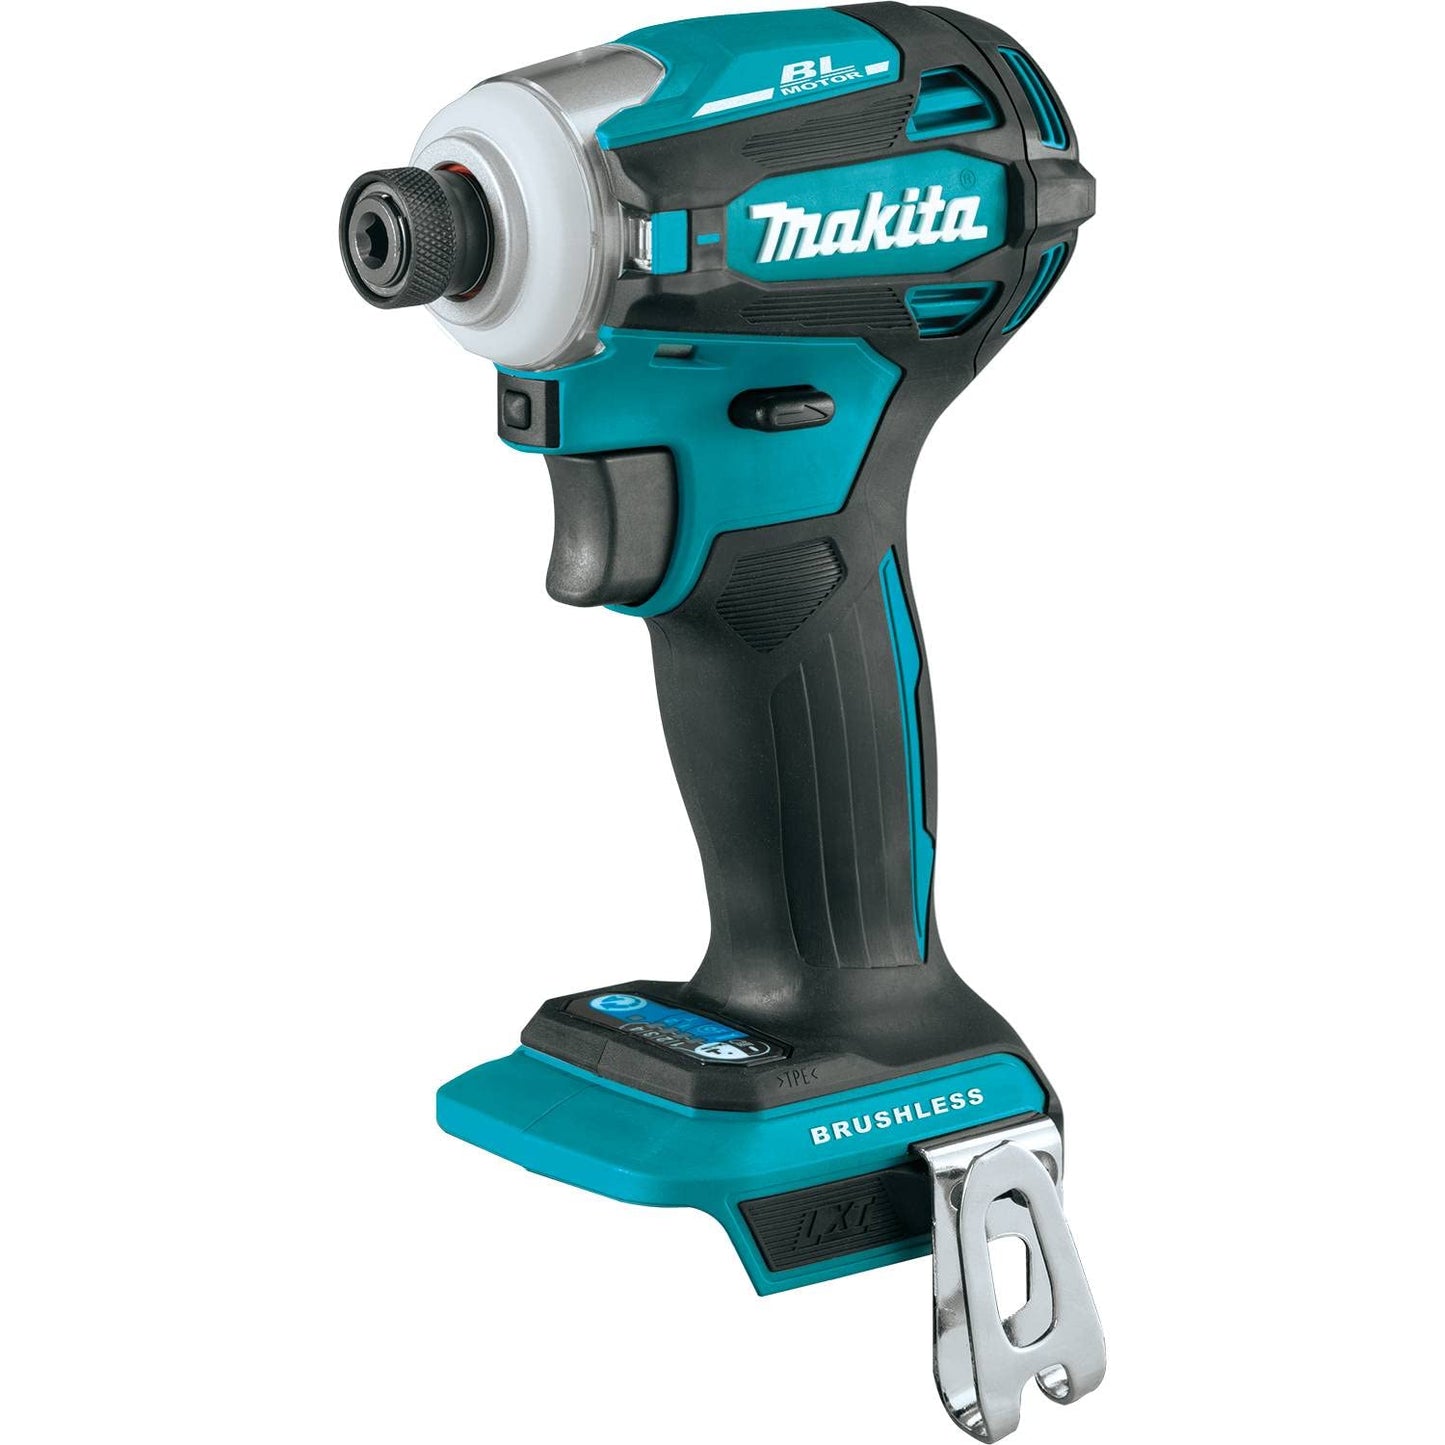 Makita 18V LXT Lithium-Ion Brushless Cordless 4-Speed Impact Driver (Tool Only)